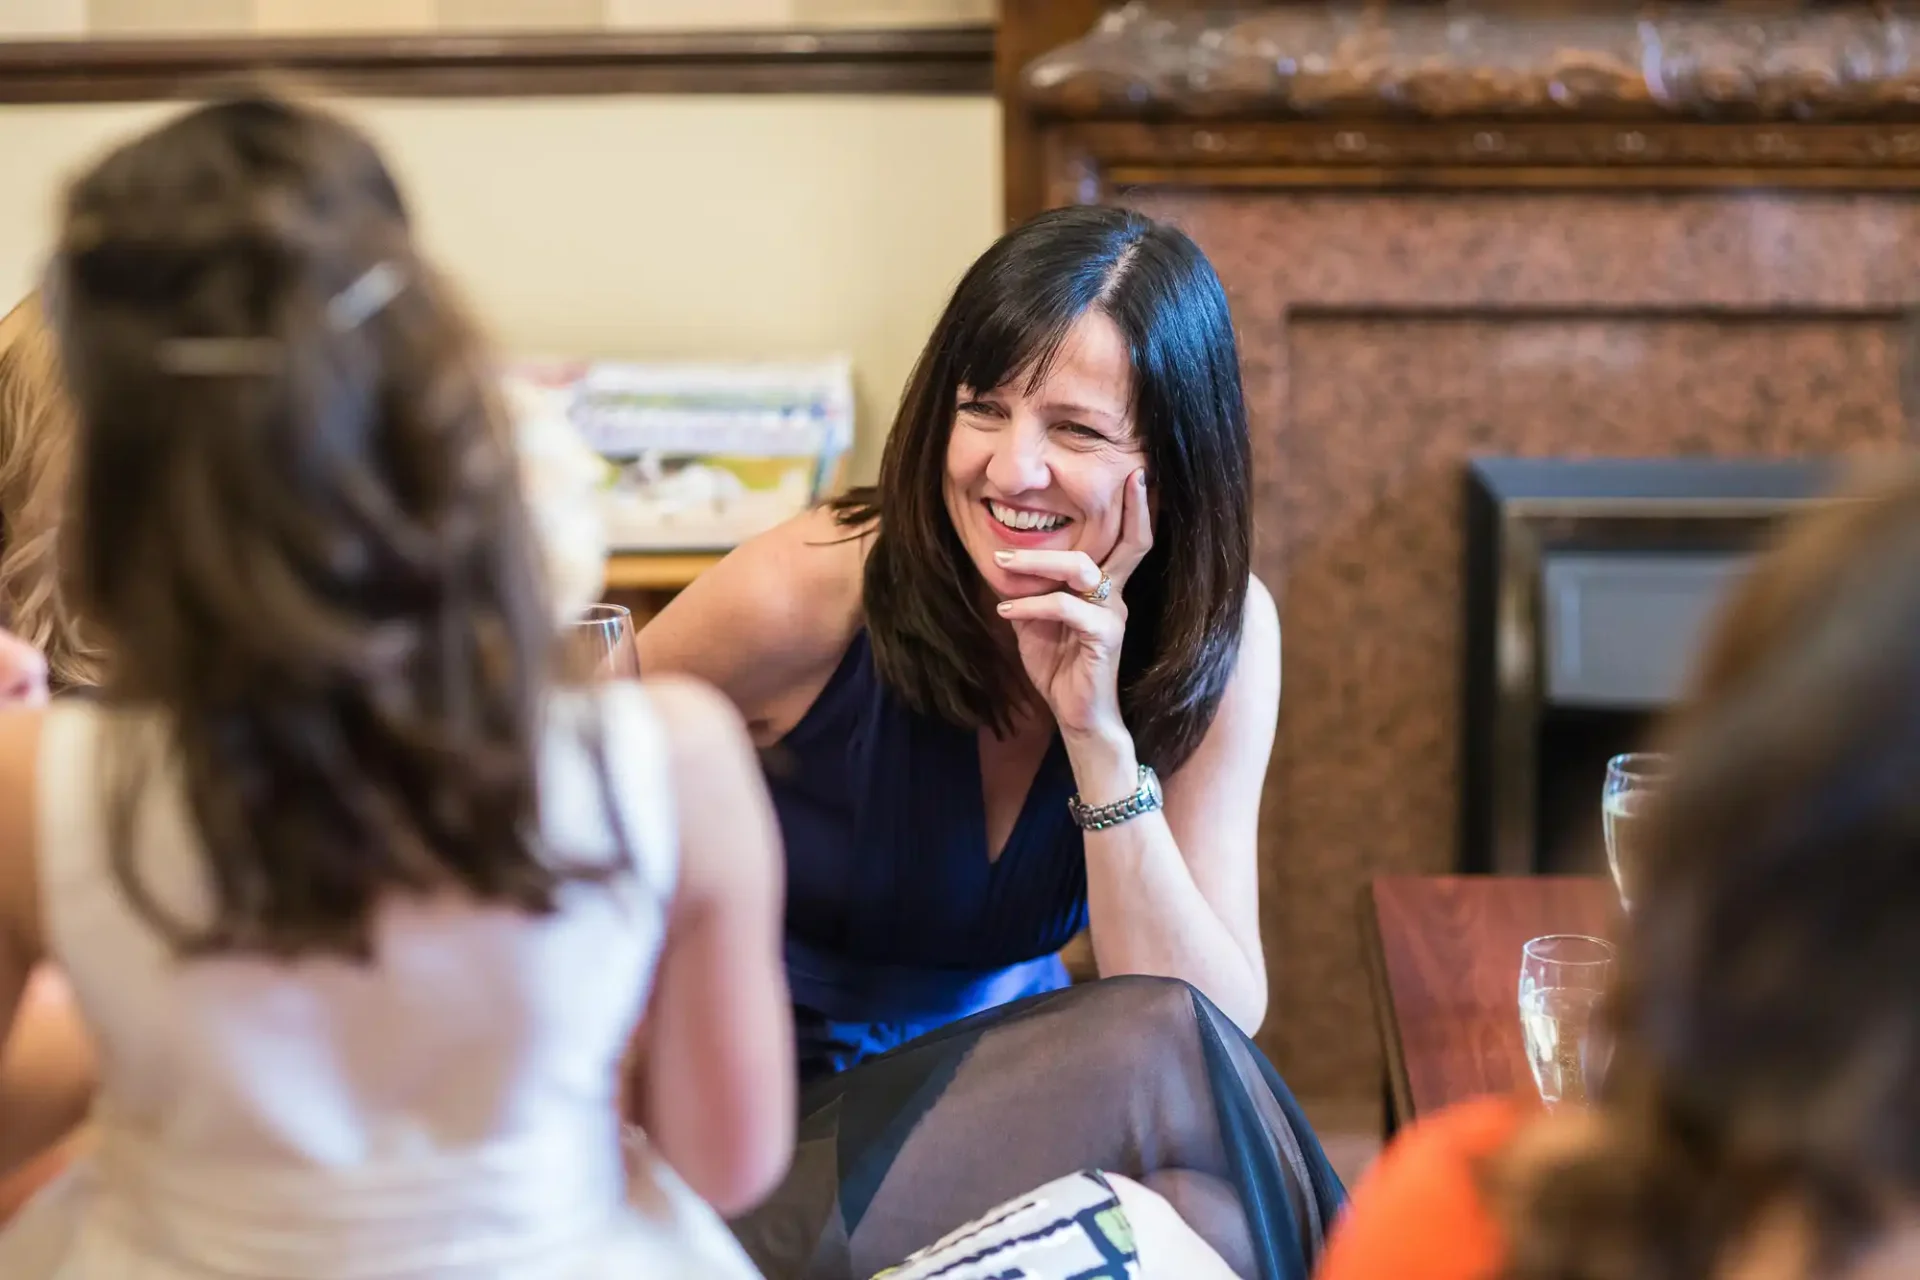 A woman with dark hair laughs joyfully during a conversation with three other women around a table in a warmly lit room.